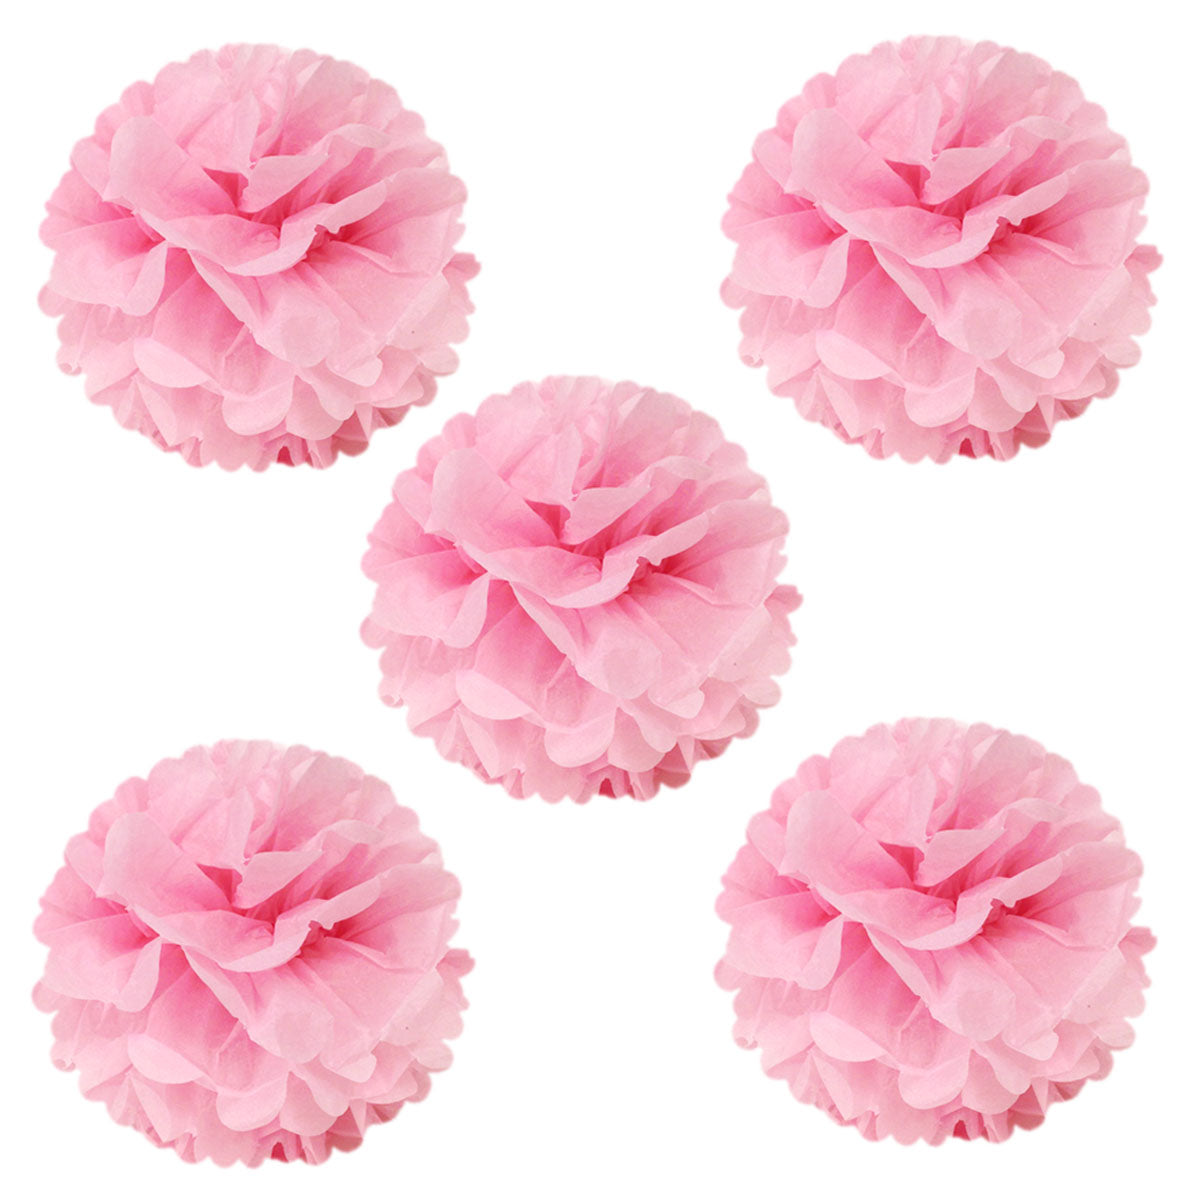 Wrapables 8 Set of 5 Tissue Pom Poms Party Decorations